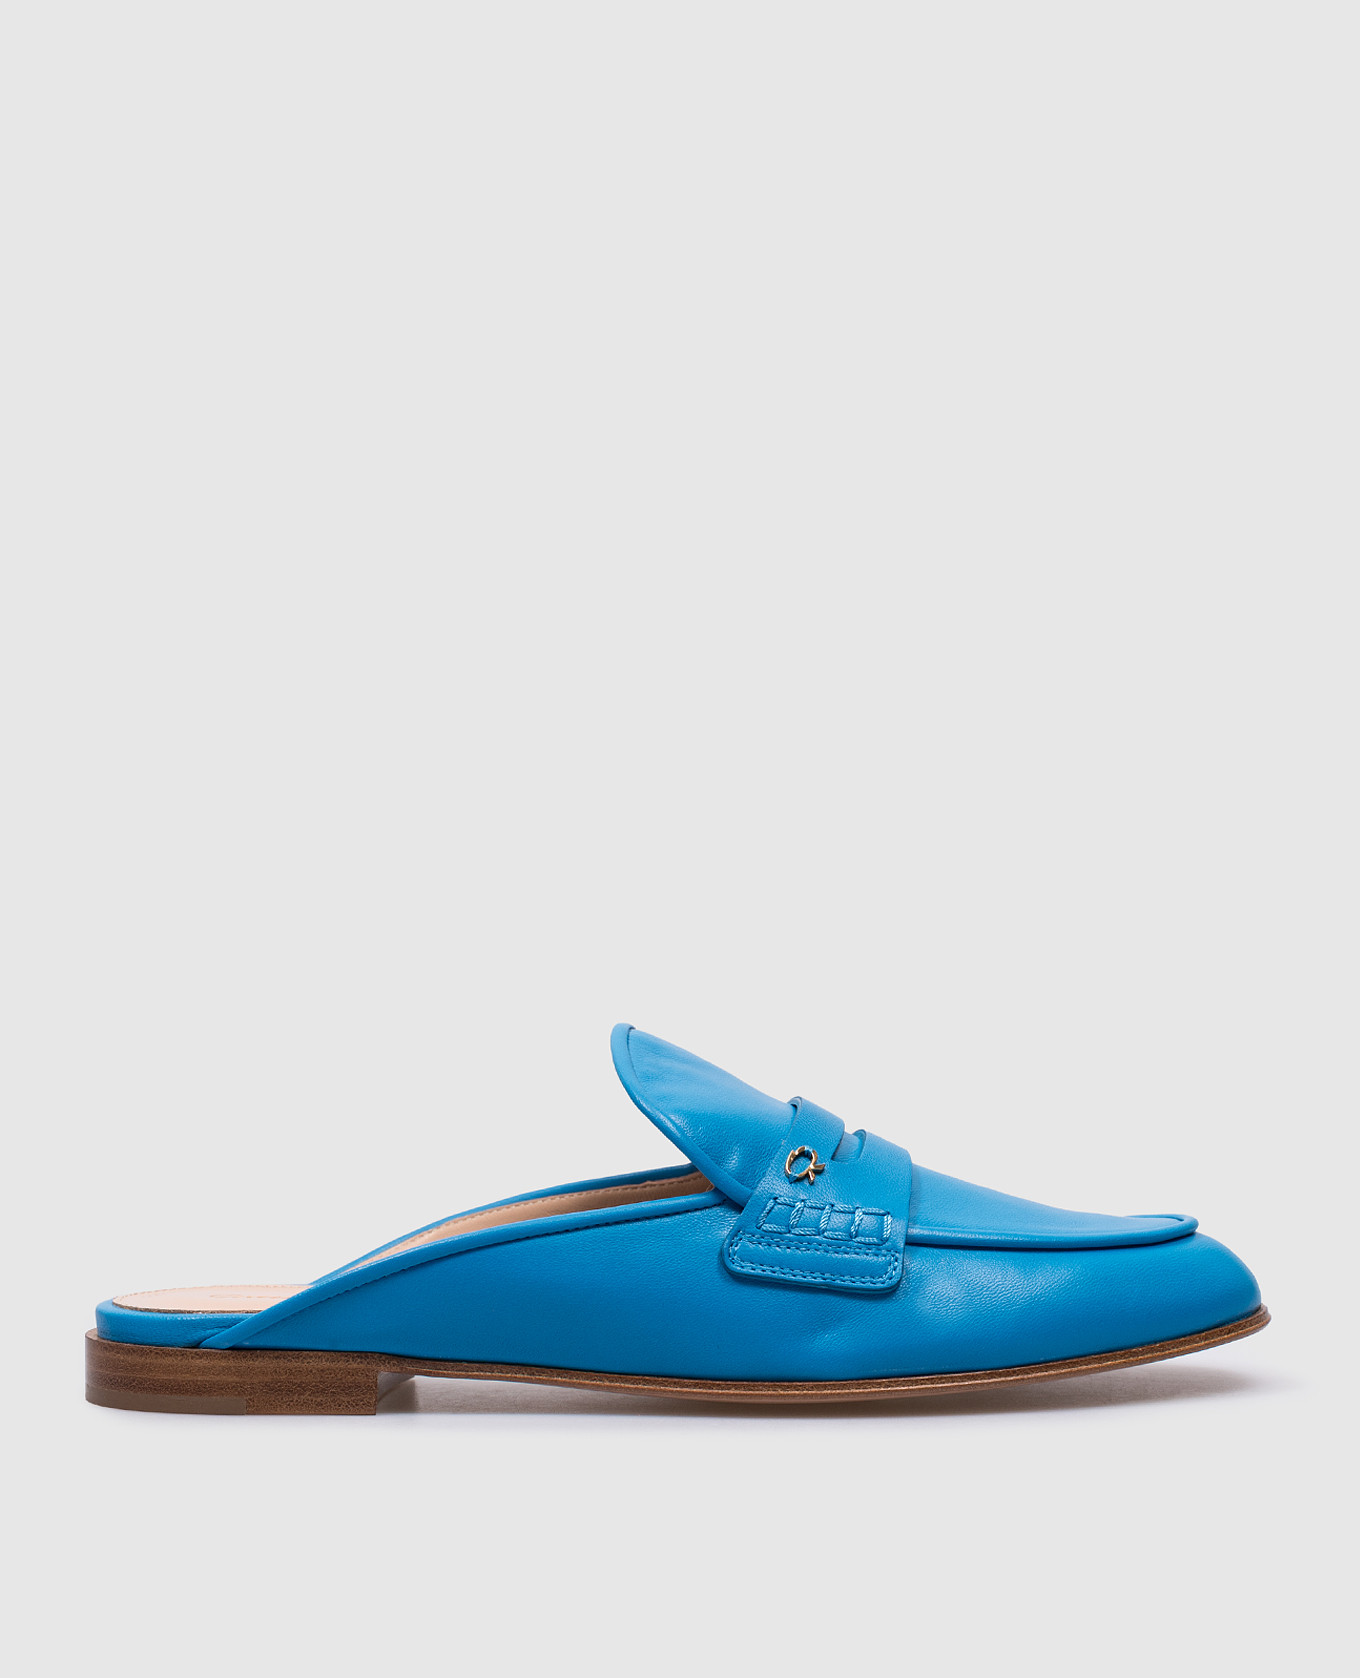 Florio blue leather mules